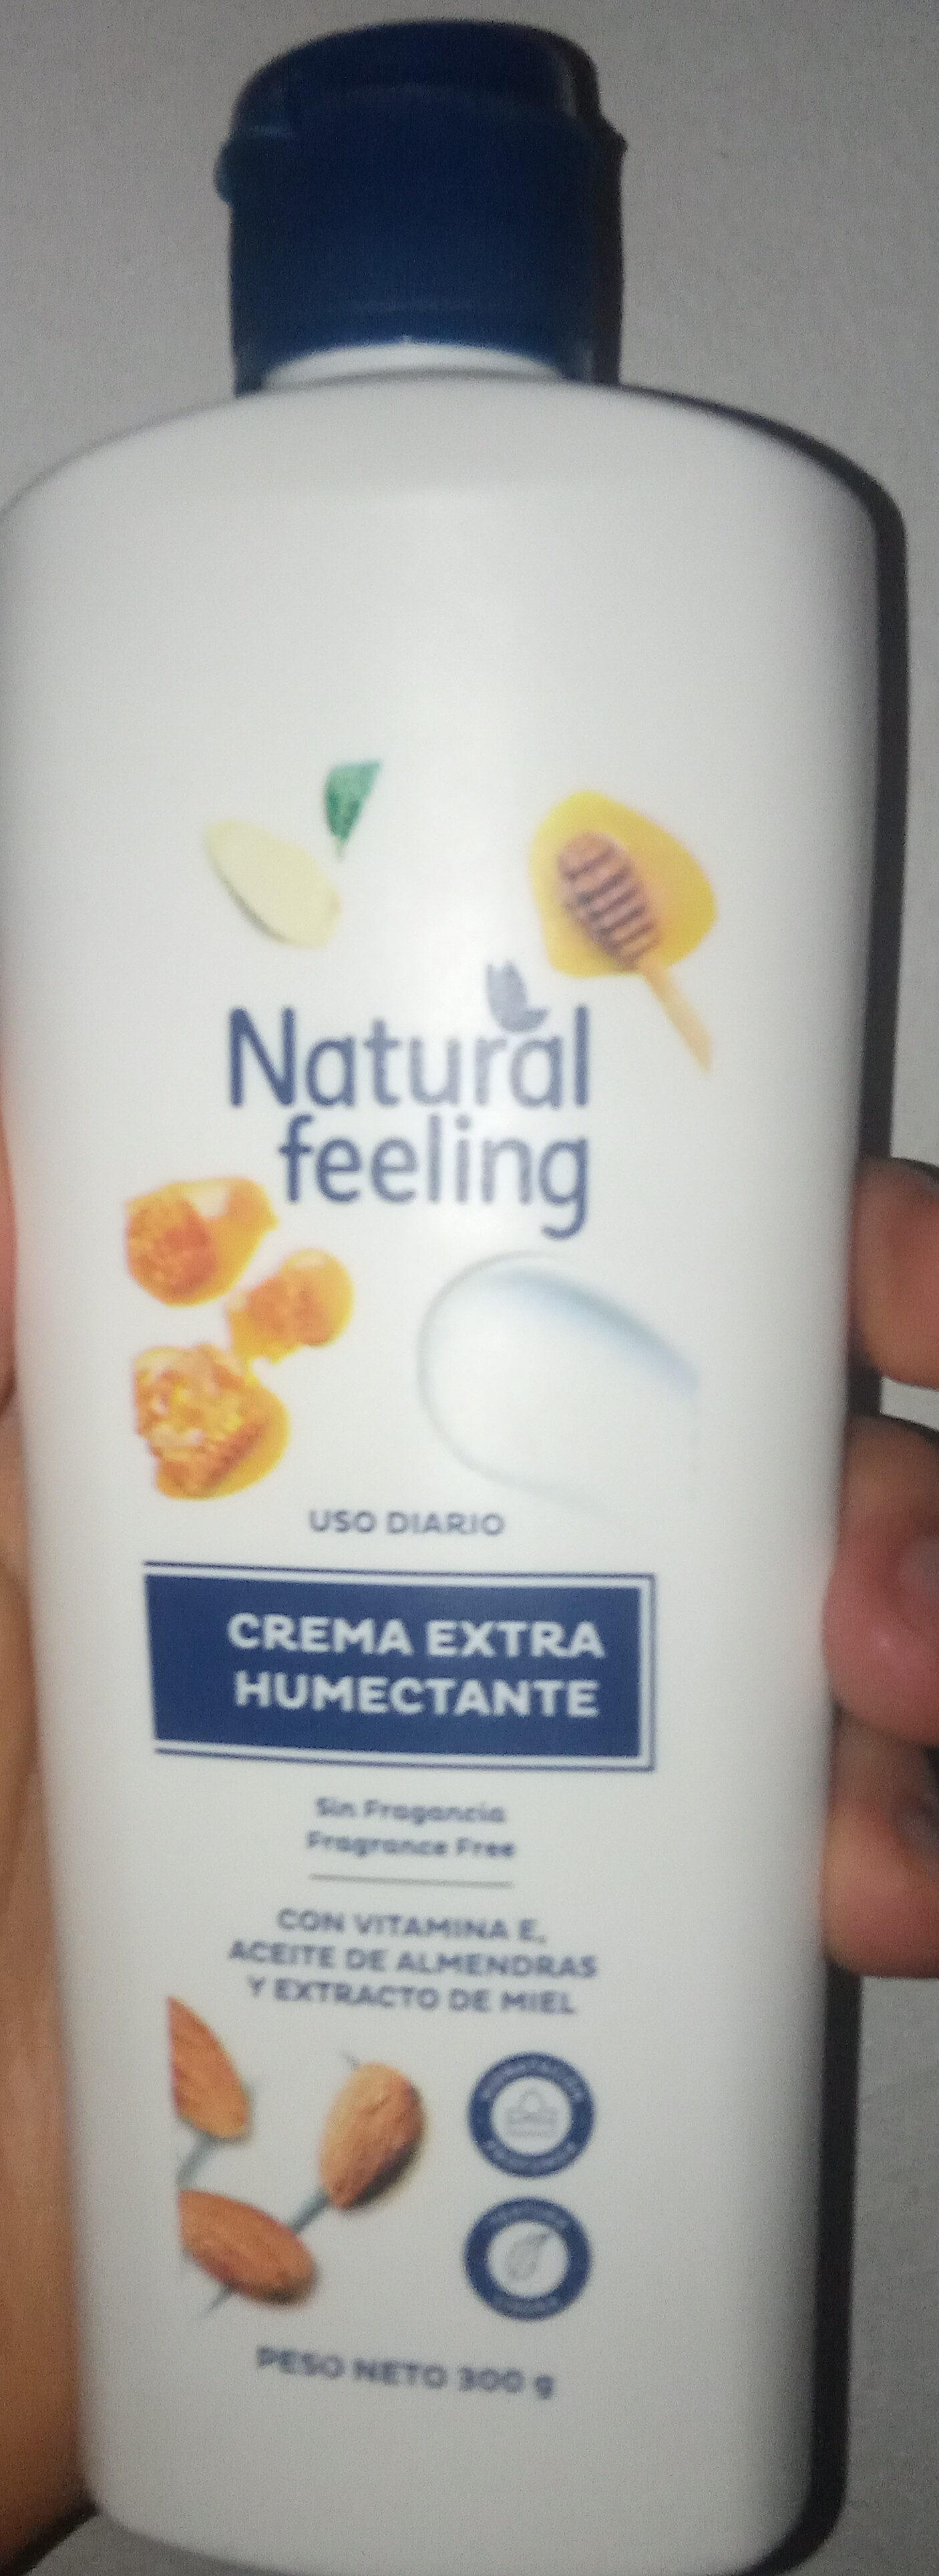 Natural Feeling | Crema Extra Humectante - Tuote - es